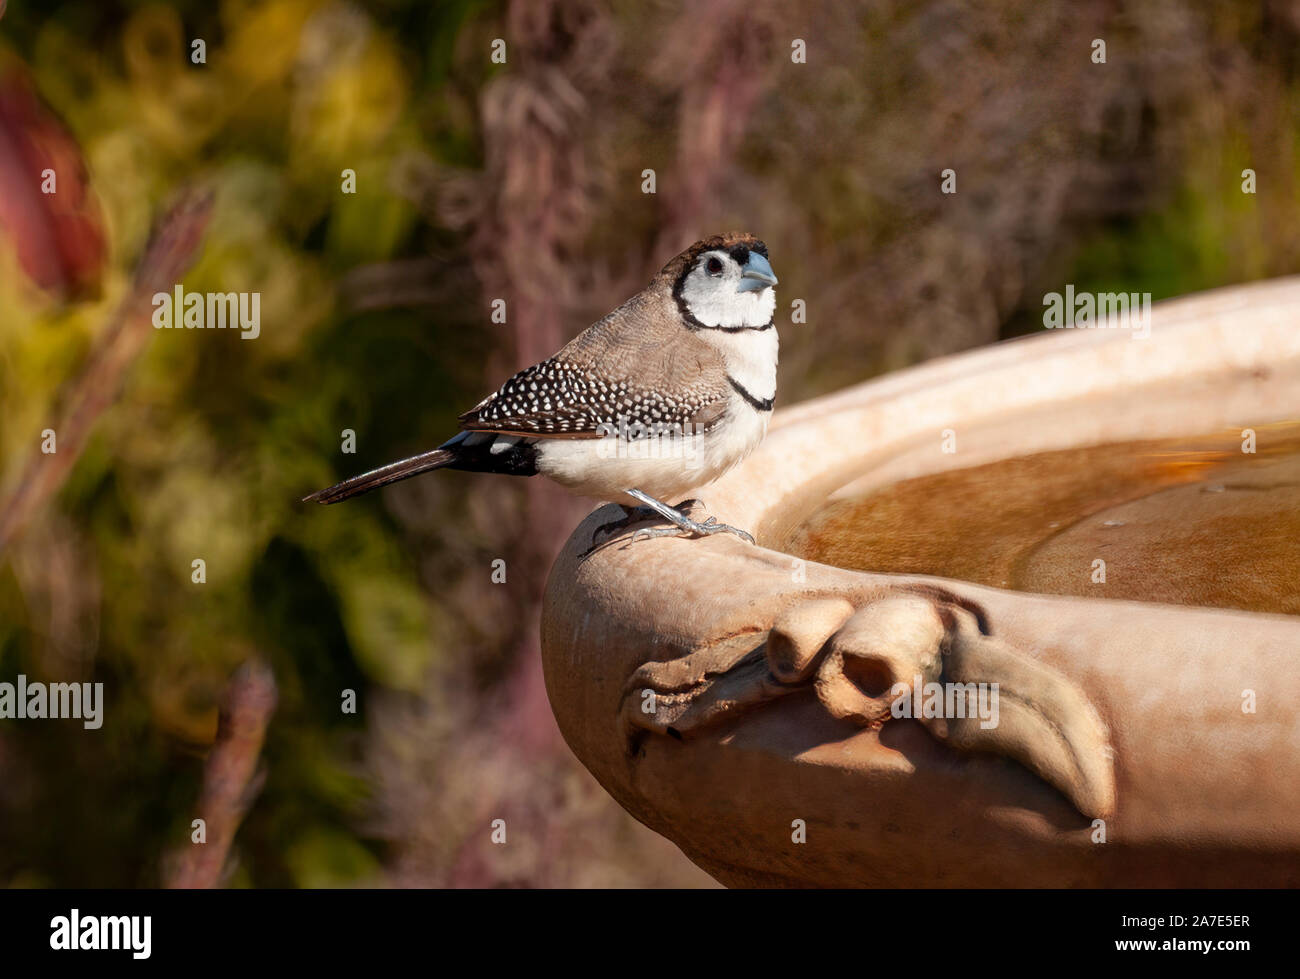 A Double-barred Finch perched on the dege of a bird bath in a home garden Stock Photo